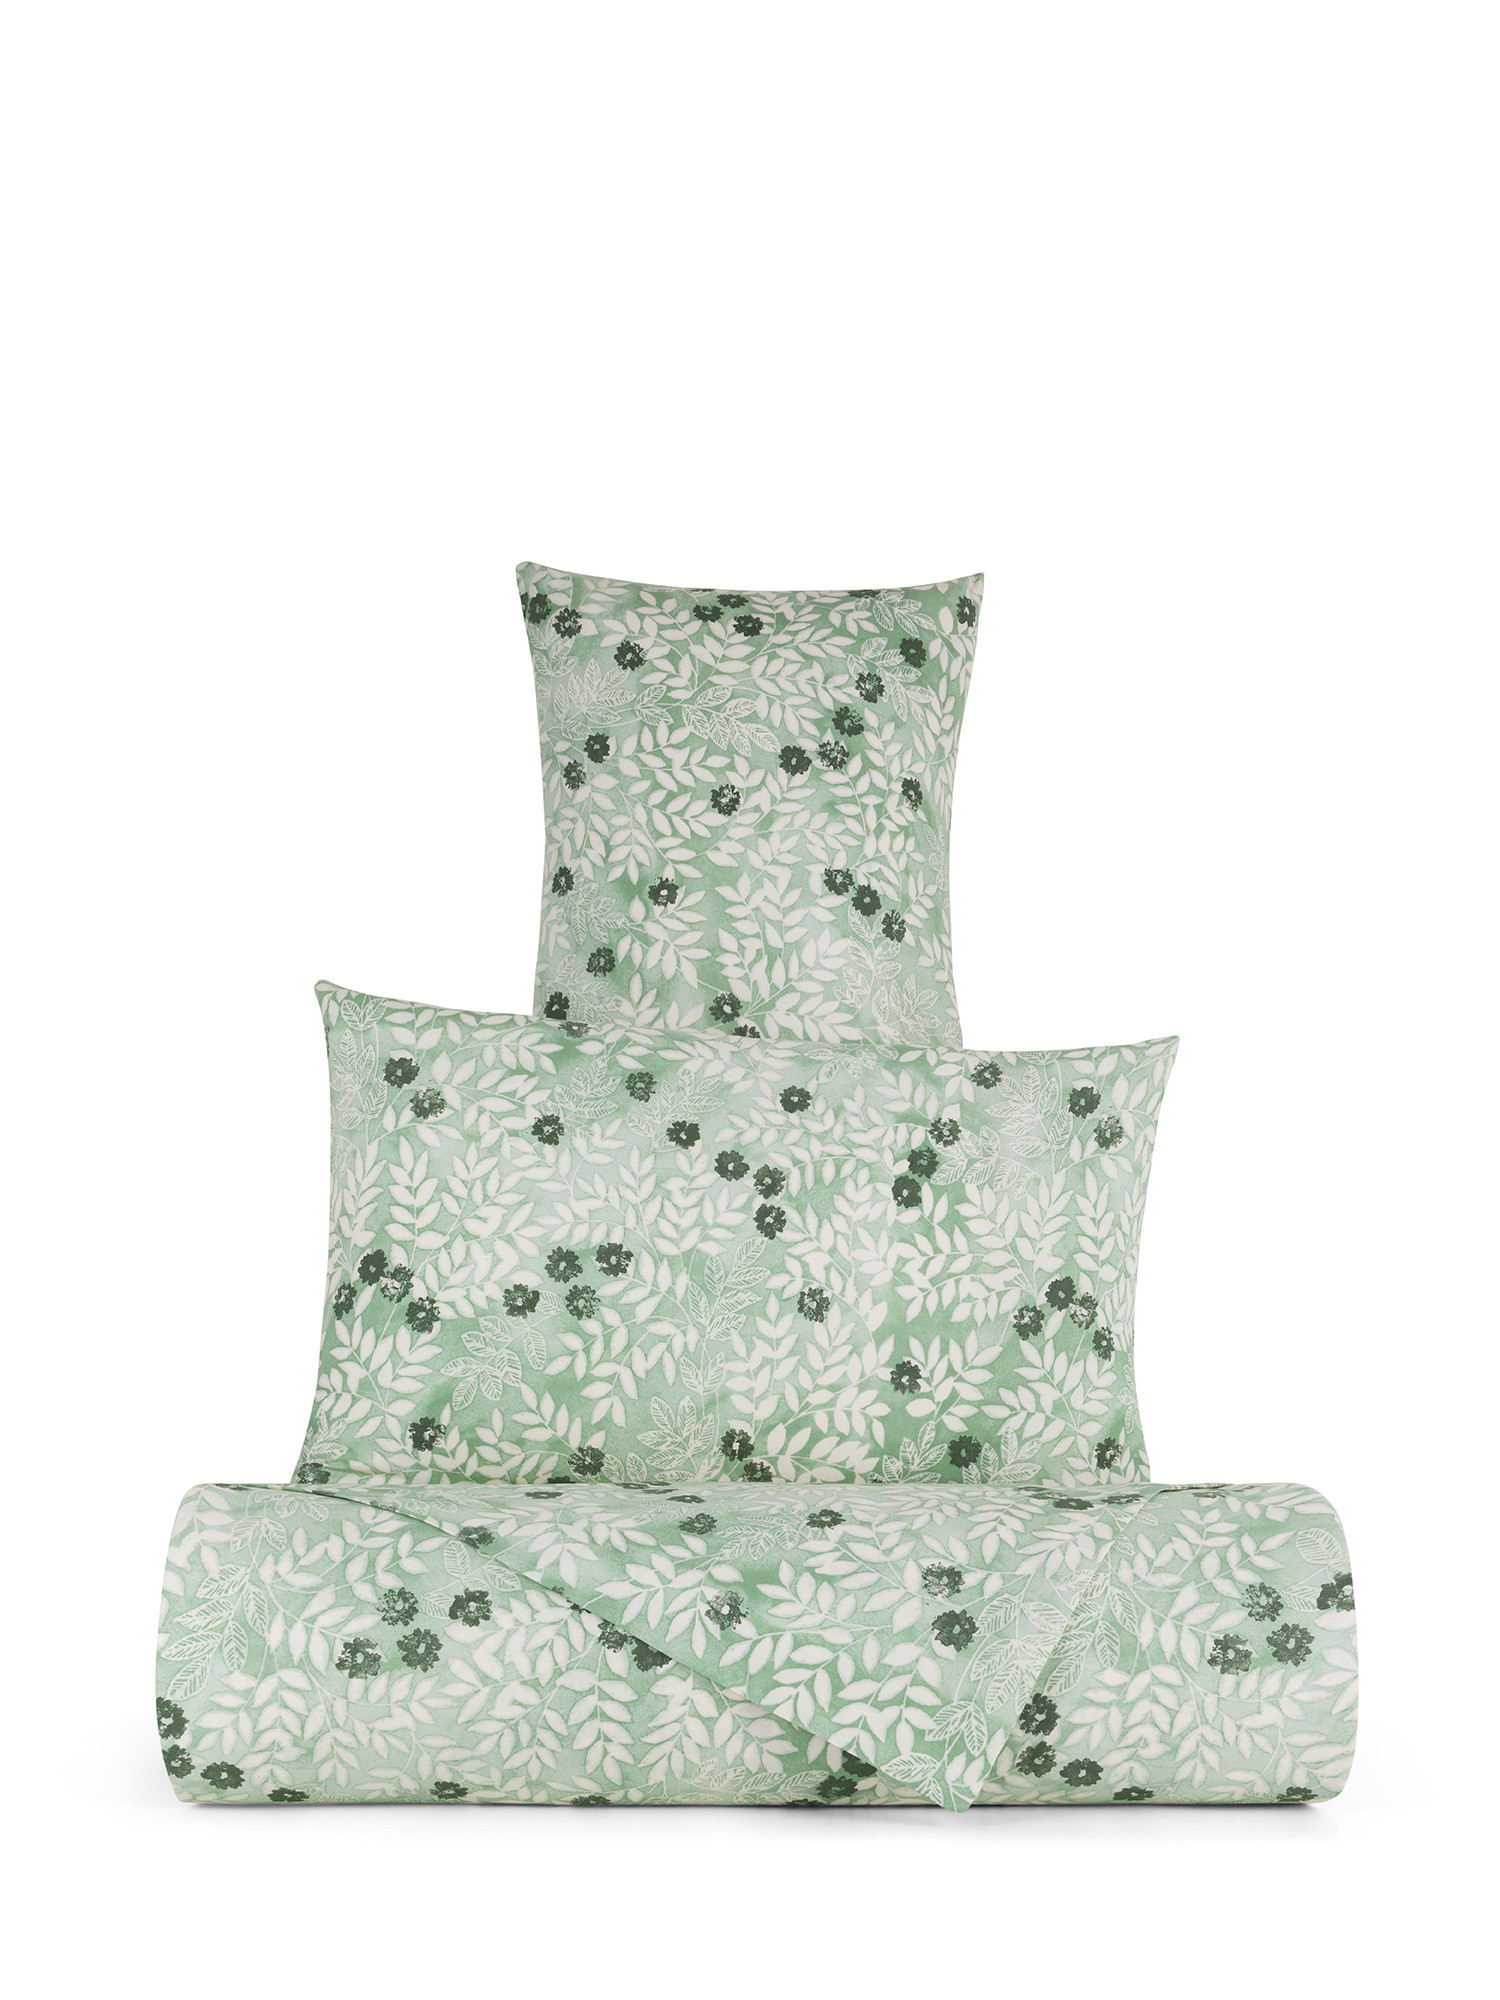 Floral patterned cotton percale sheet set, Green, large image number 0